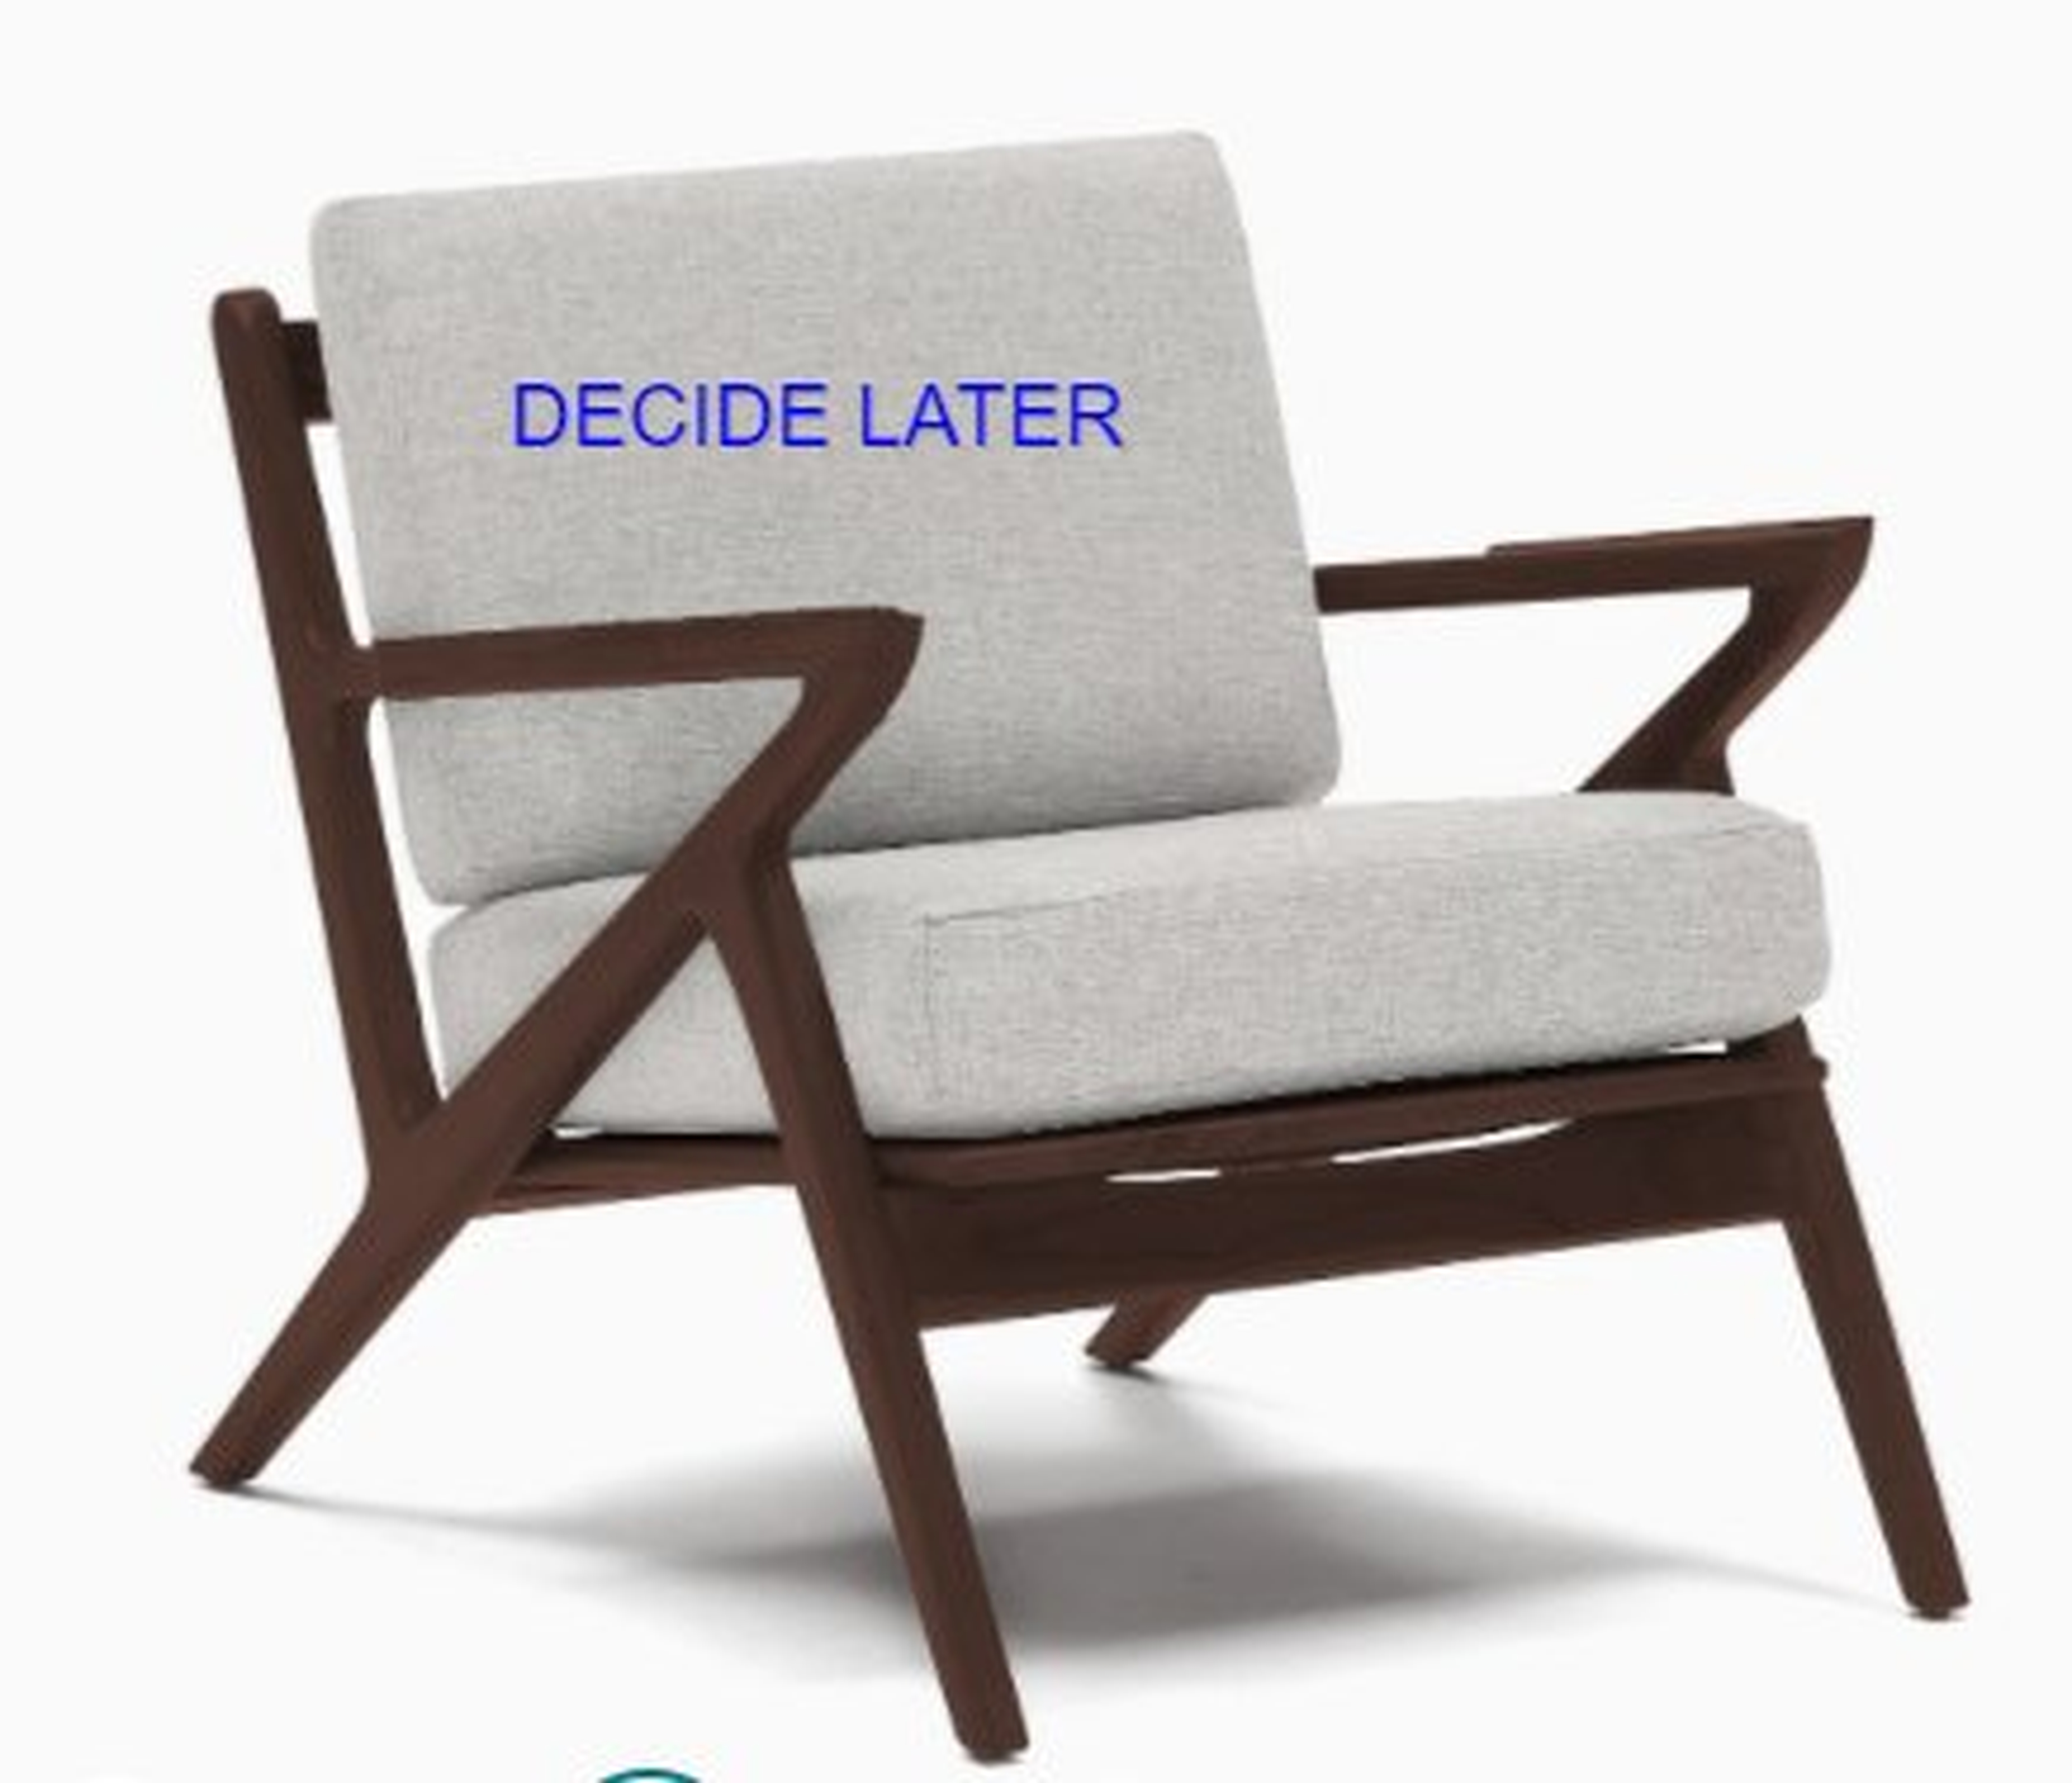 Soto Concave Arm Chair - "Decide Later" fabric - Joybird